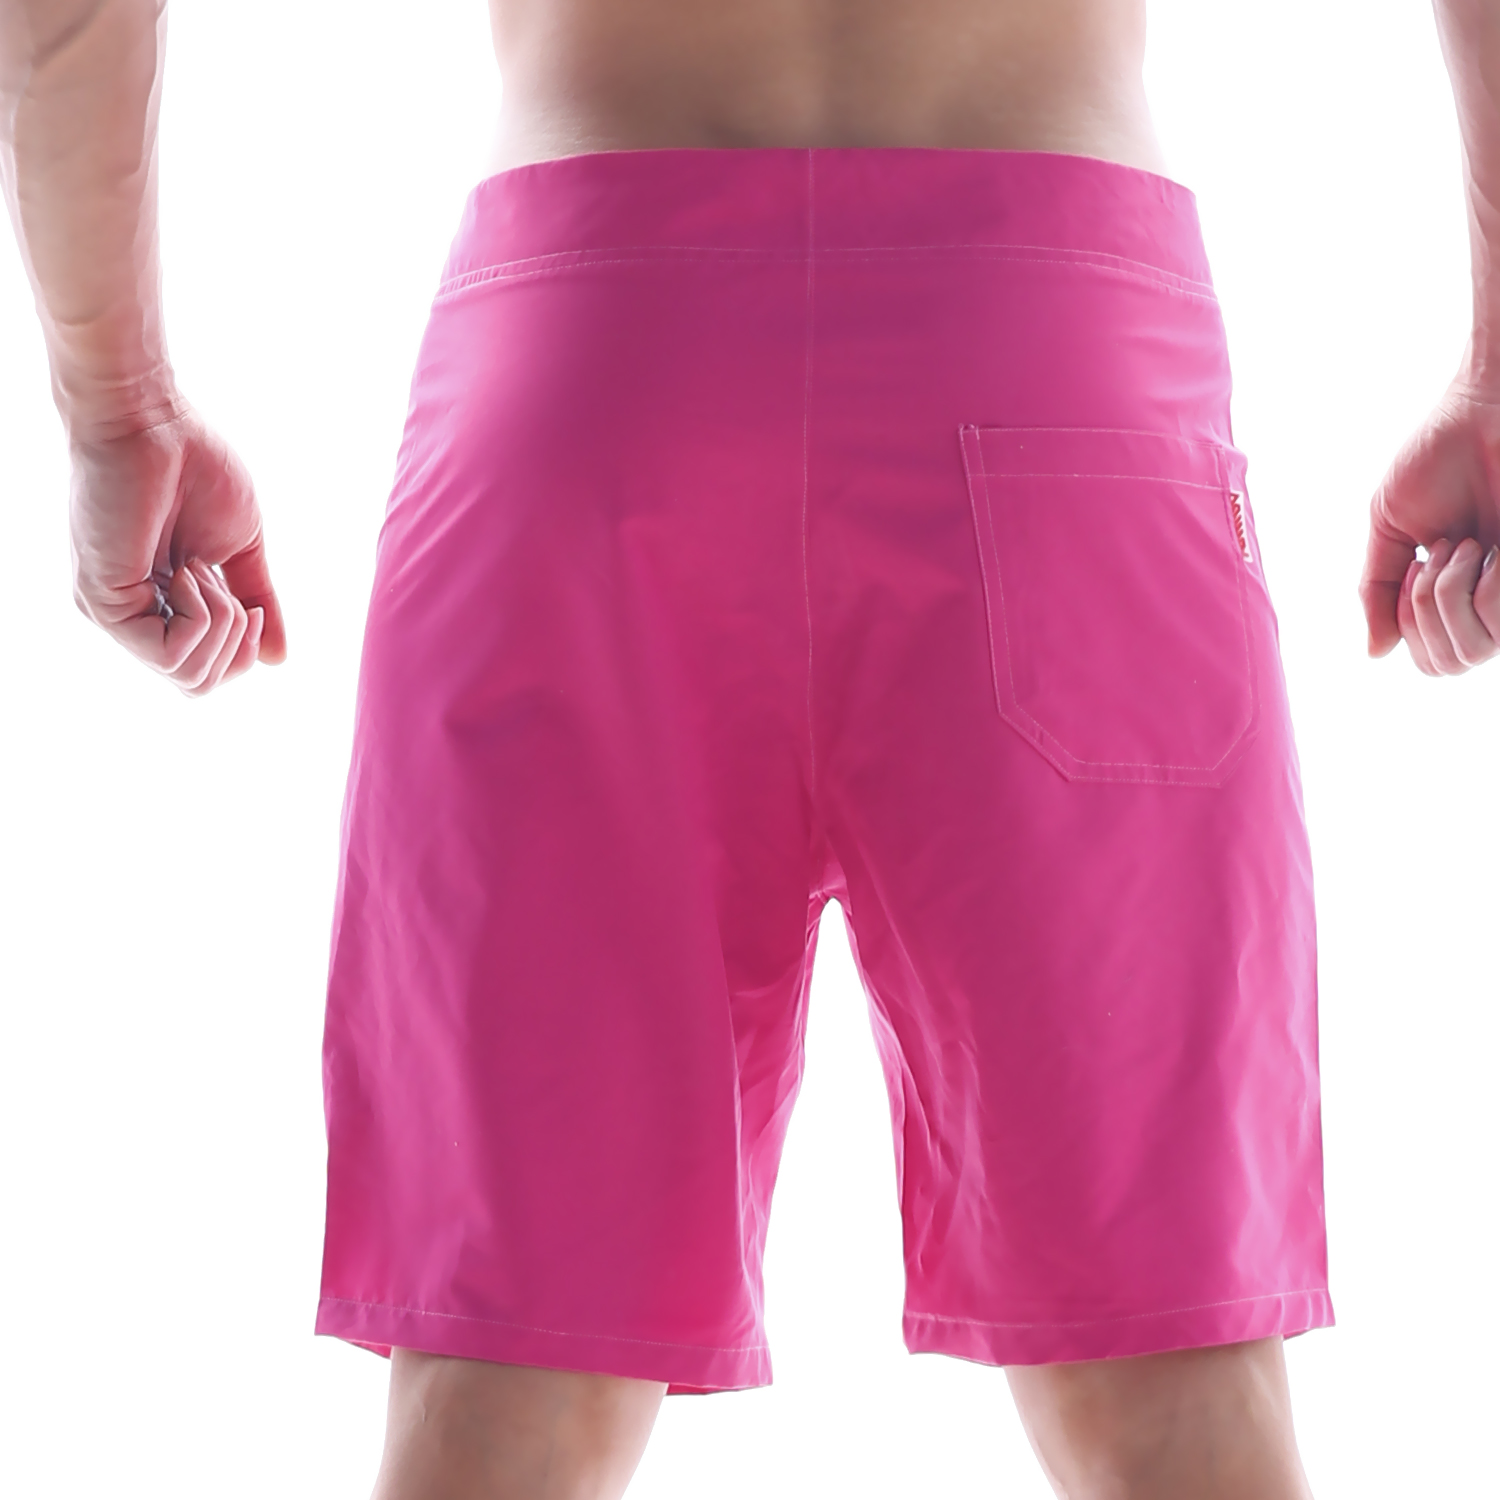 [M2W] Physique Board Short Pink (4706-01)